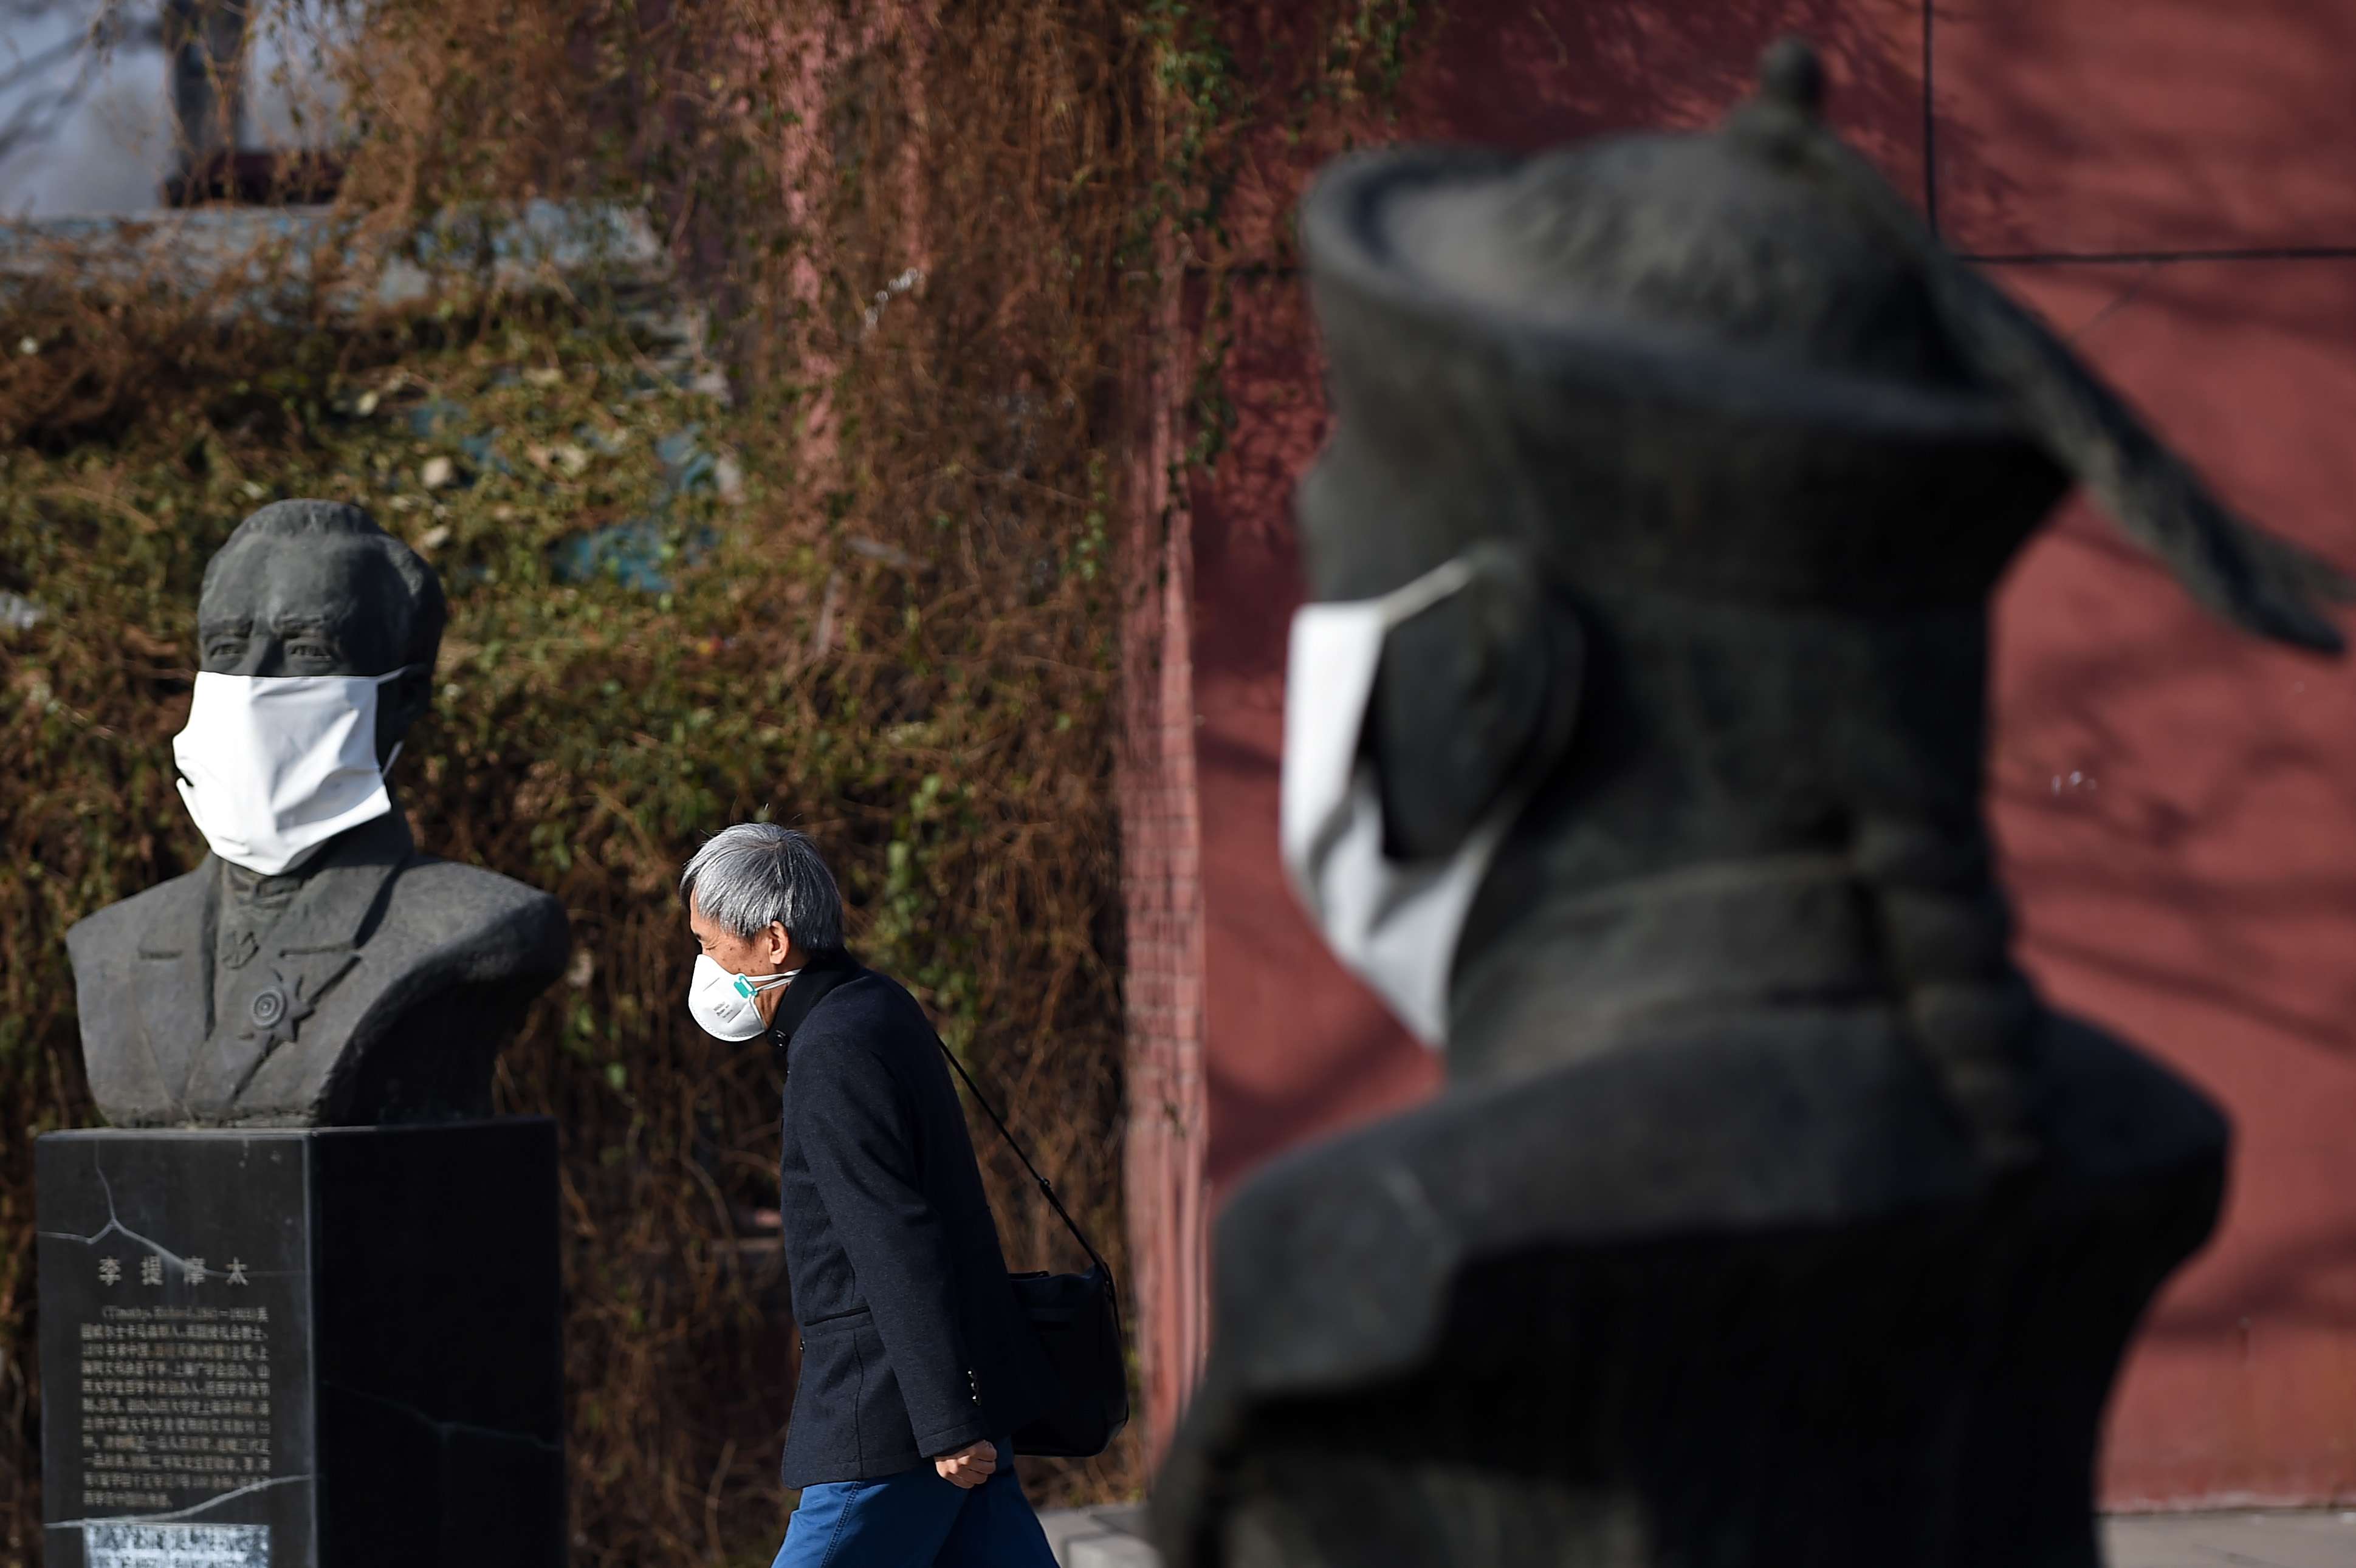 Masks protecting against pollution are a common sight in China, the world’s largest carbon emitter. Photo: China News Service